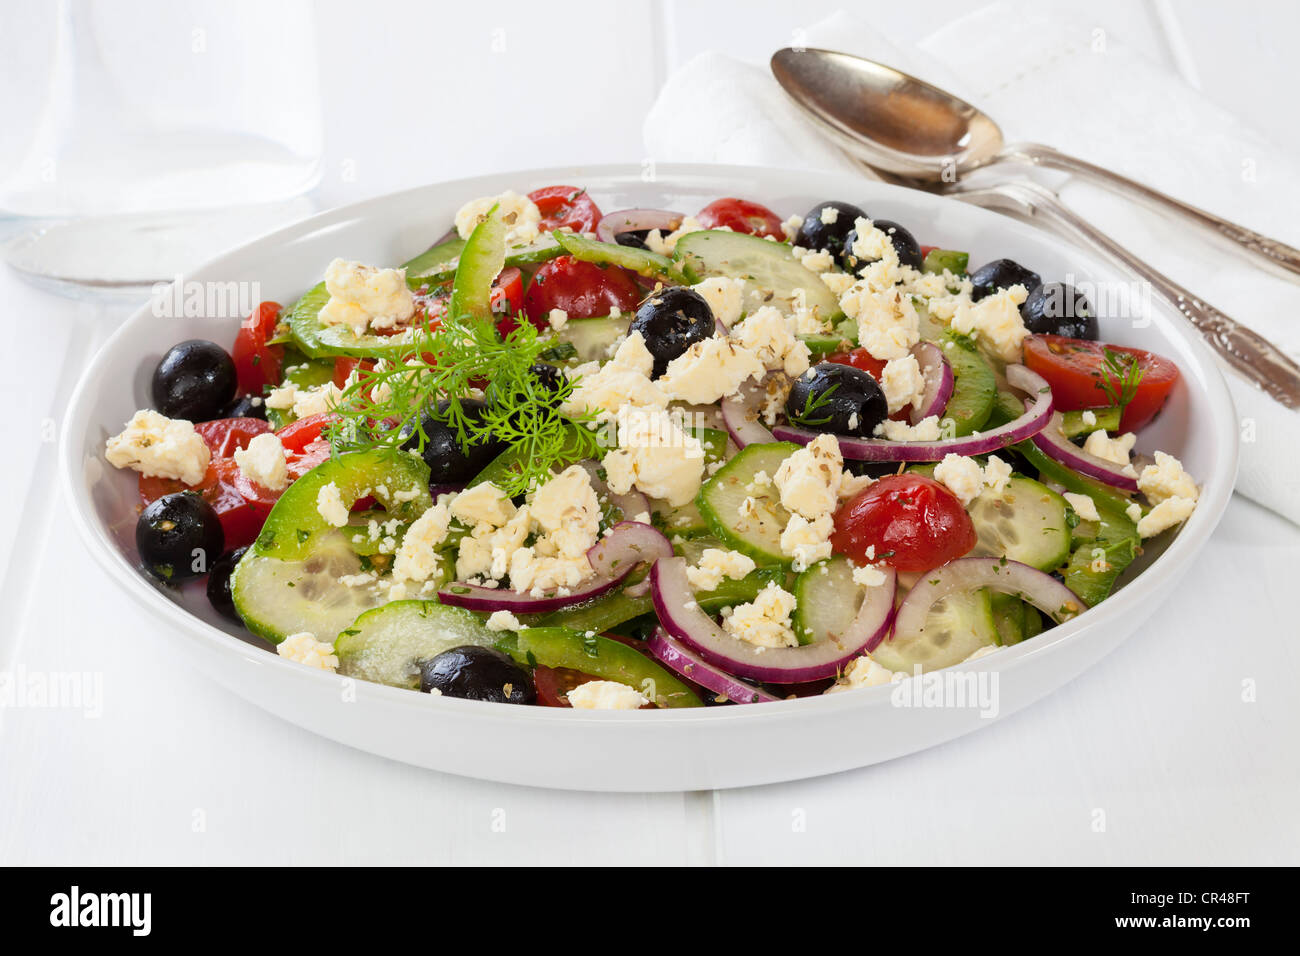 Greek salad, a delicious combination of green capsicum, black olives, cucumber, tomato, red onion, mint, dill and oregano, Stock Photo